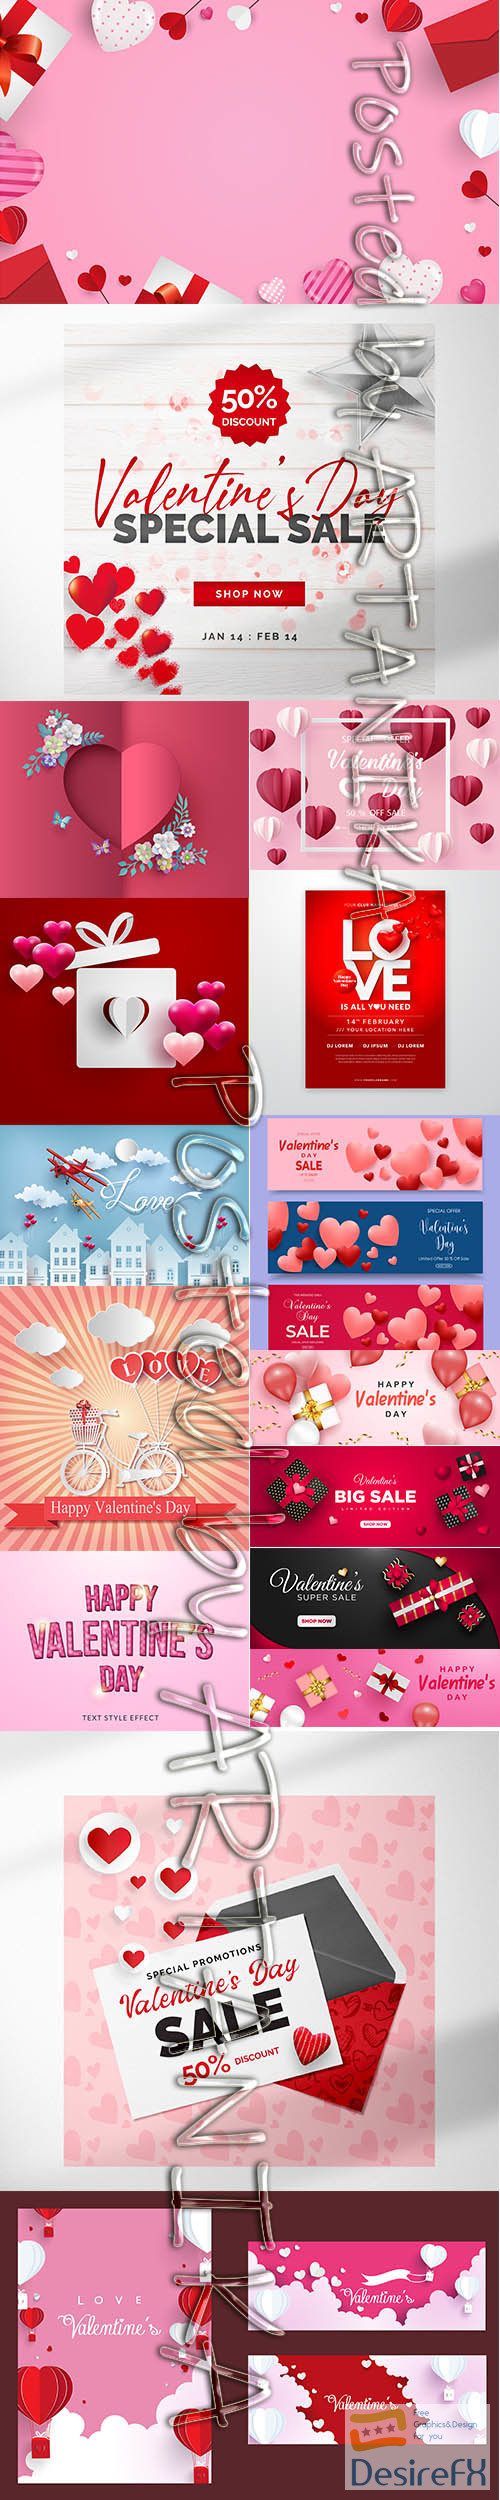 Big Set of Beautiful Valentines Day Illustrations and Cover Template